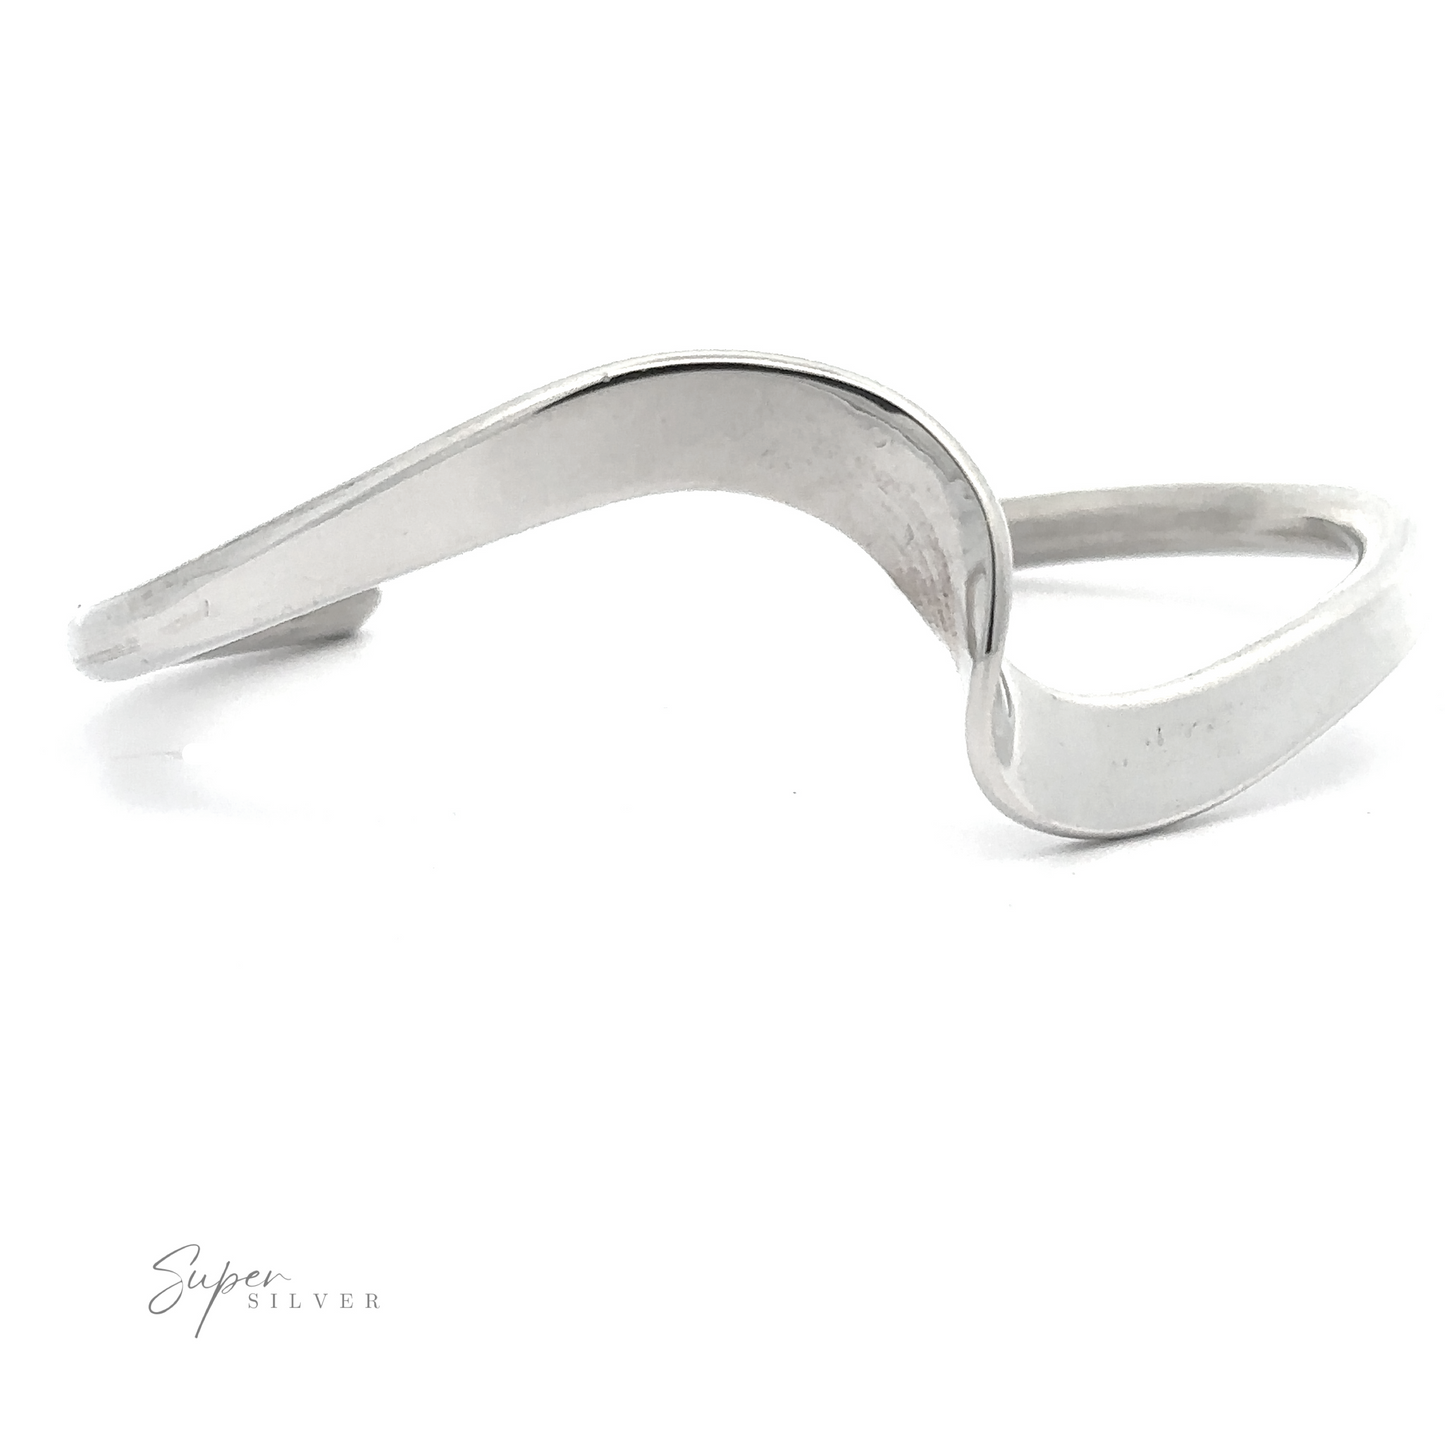 A sleek, curved sterling silver cuff bracelet featuring the text "Native American Handmade Thick Silver Wave Cuff" printed in the lower left corner. This piece echoes the elegance often found in Native American Jewelry.